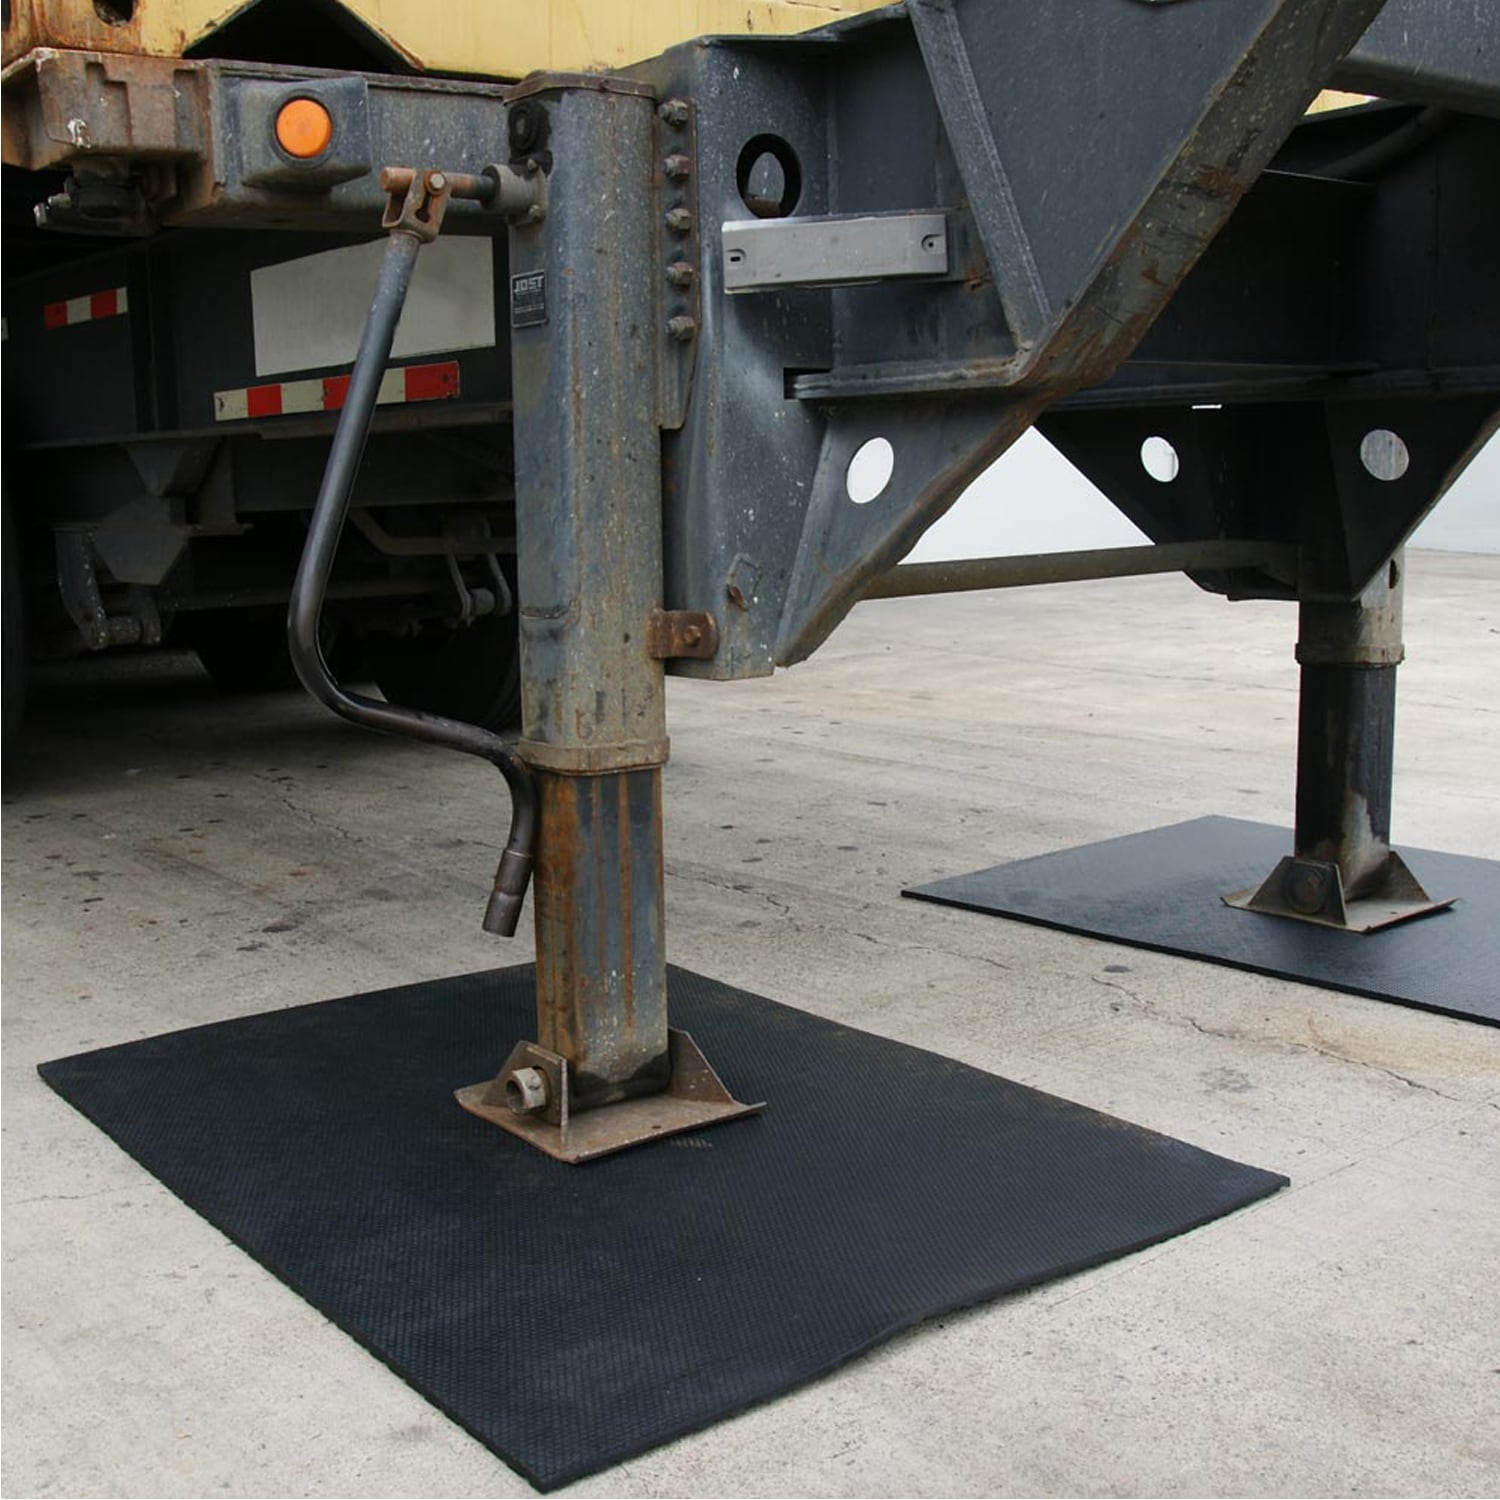 Little Giant® Pre-Cut Rubber Utility Mats provide versatility and  durability - Miller Manufacturing Company Blog